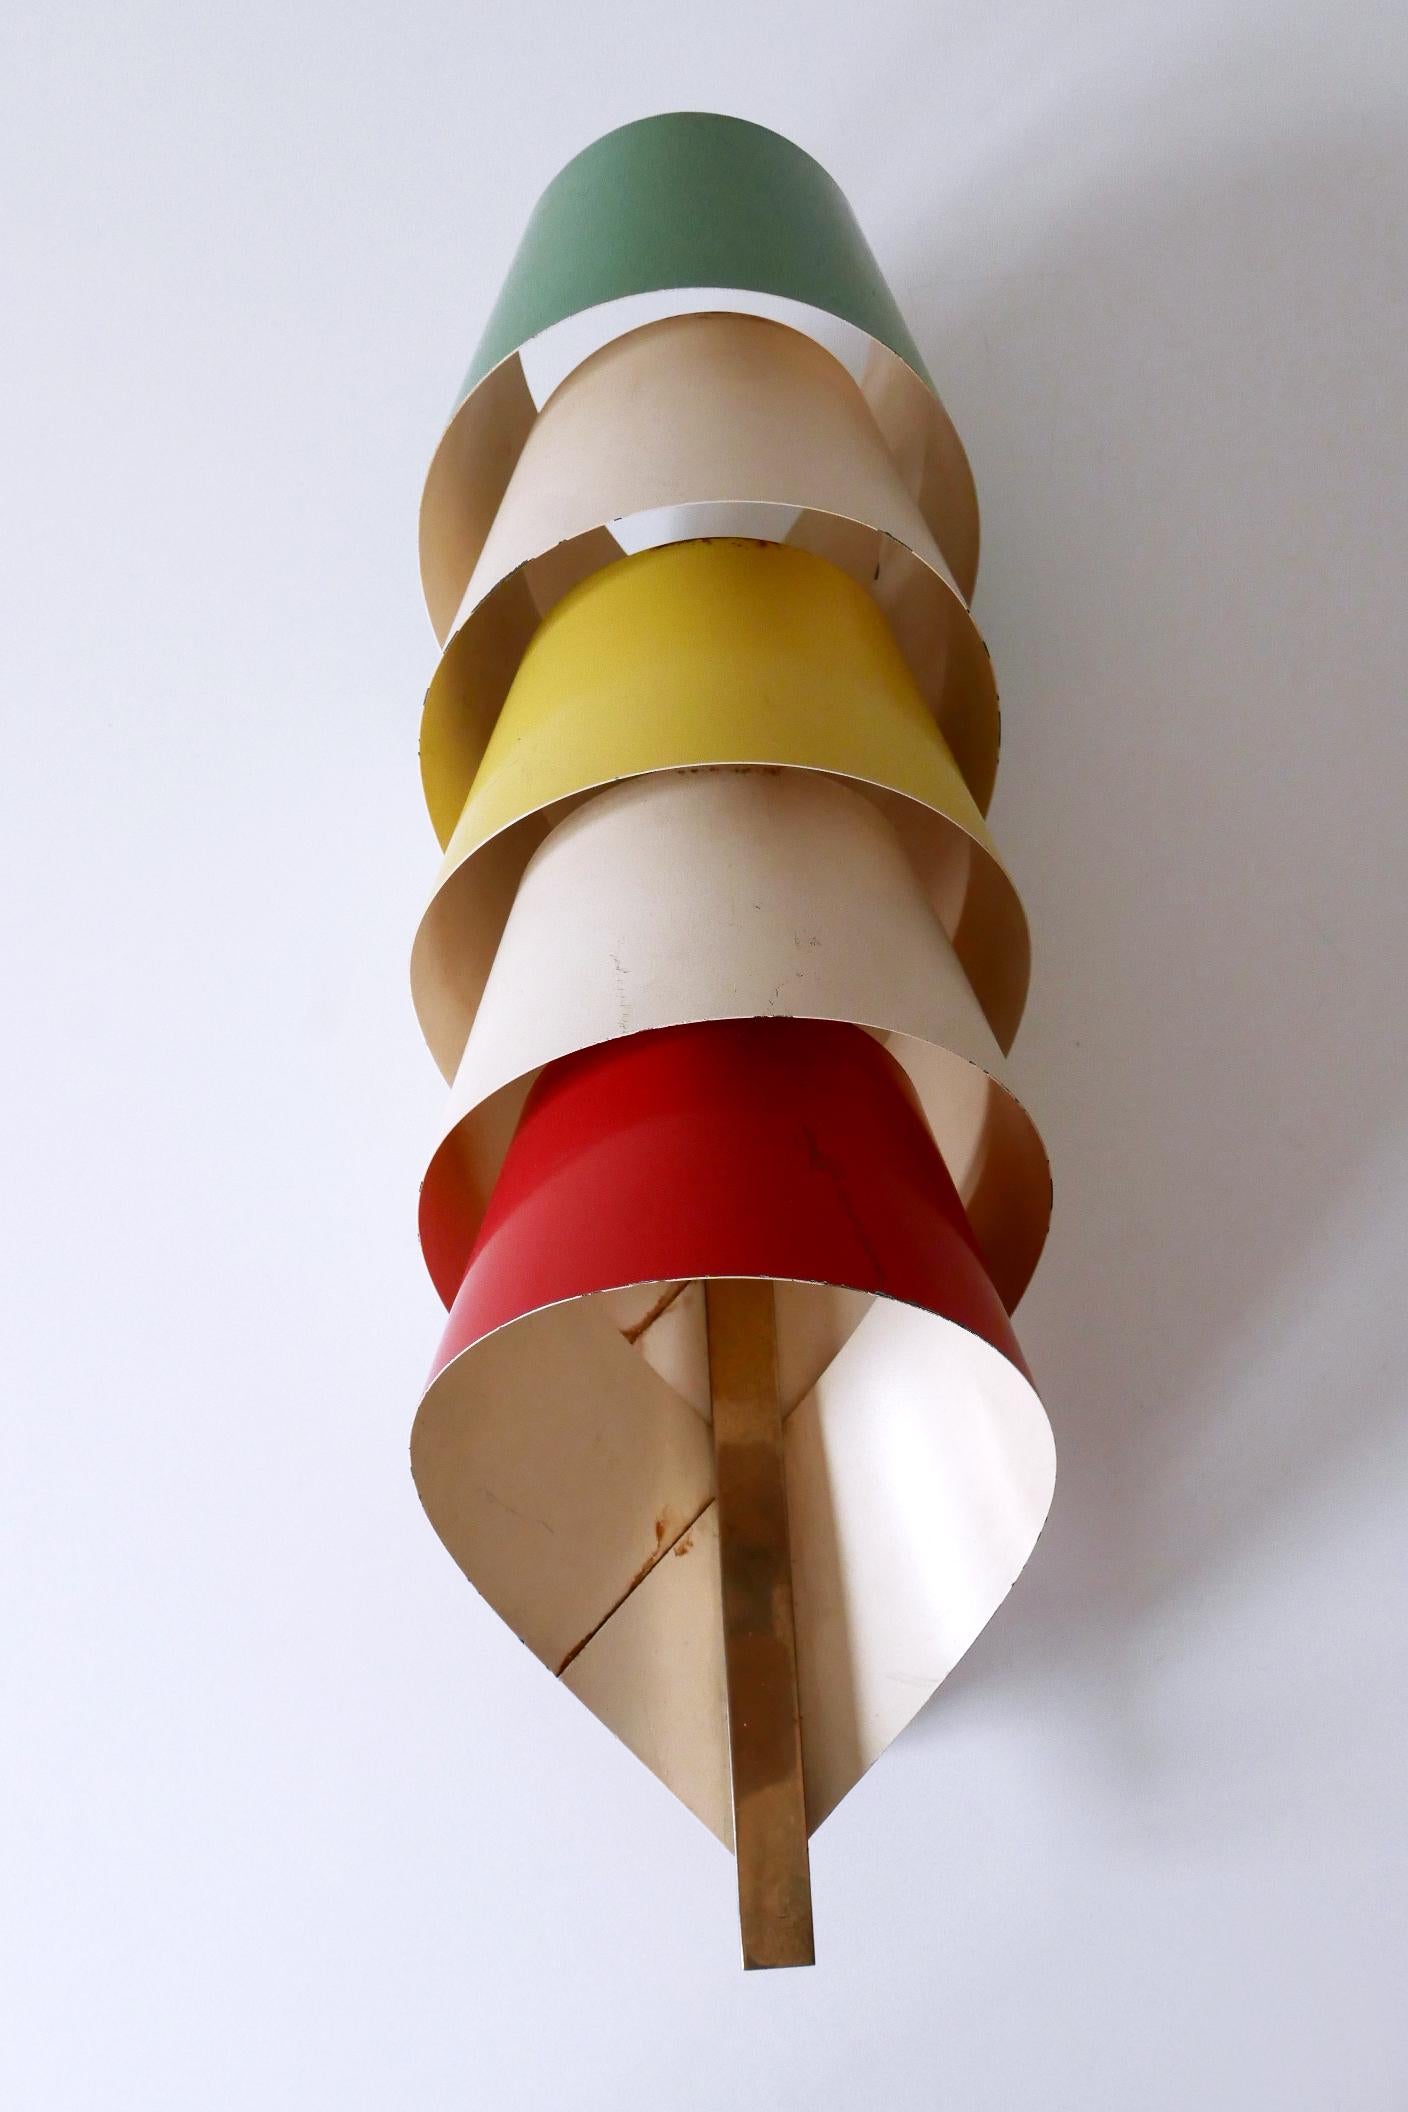 Rare & Decorative Mid-Century Modern Sconce or Wall Lamp Scandinavia 1950s For Sale 3